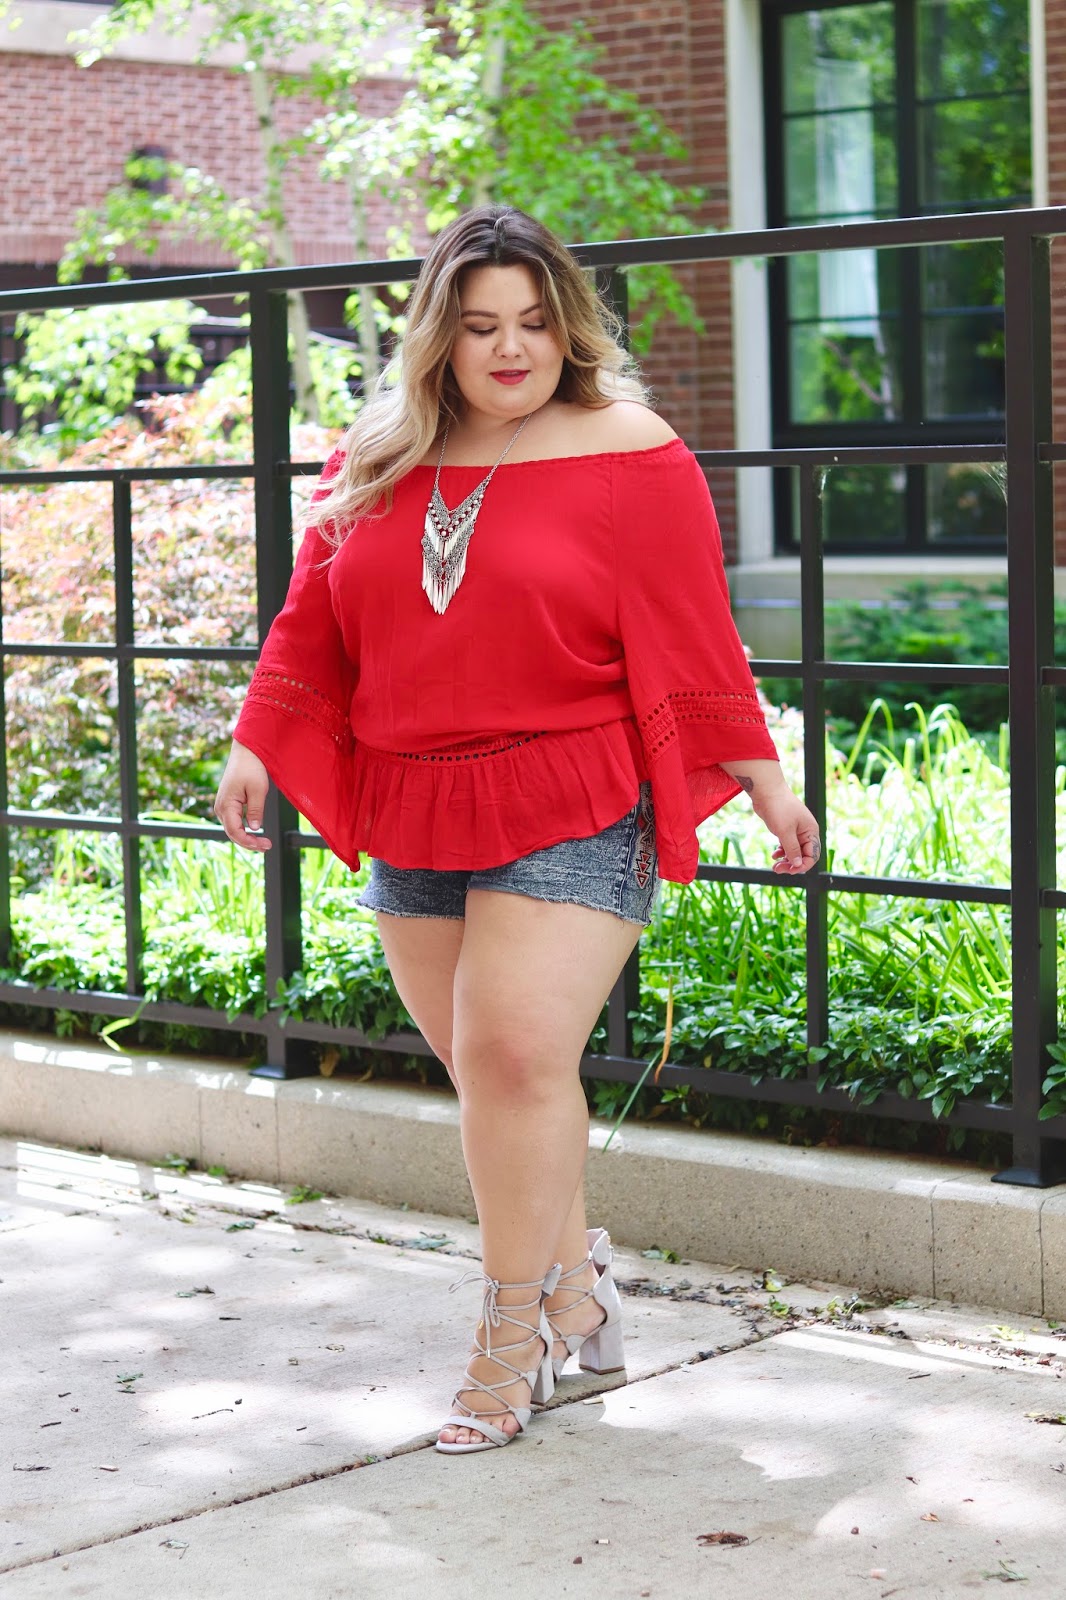 festival fashion inspiration, Chicago, blogger review, natalie craig, natalie in the city, plus size fashion blogger, Chicago blogger, midwest fashion blogger, plus size, affordable plus size fashion, DJ Khaled wild thoughts ft. Rihanna Bryson tiller, Rihanna red top wild thoughts, wild thoughts music video, Rihanna style, plus size fashion, fatshion, curves and confidence, curvy, summer plus size fashion